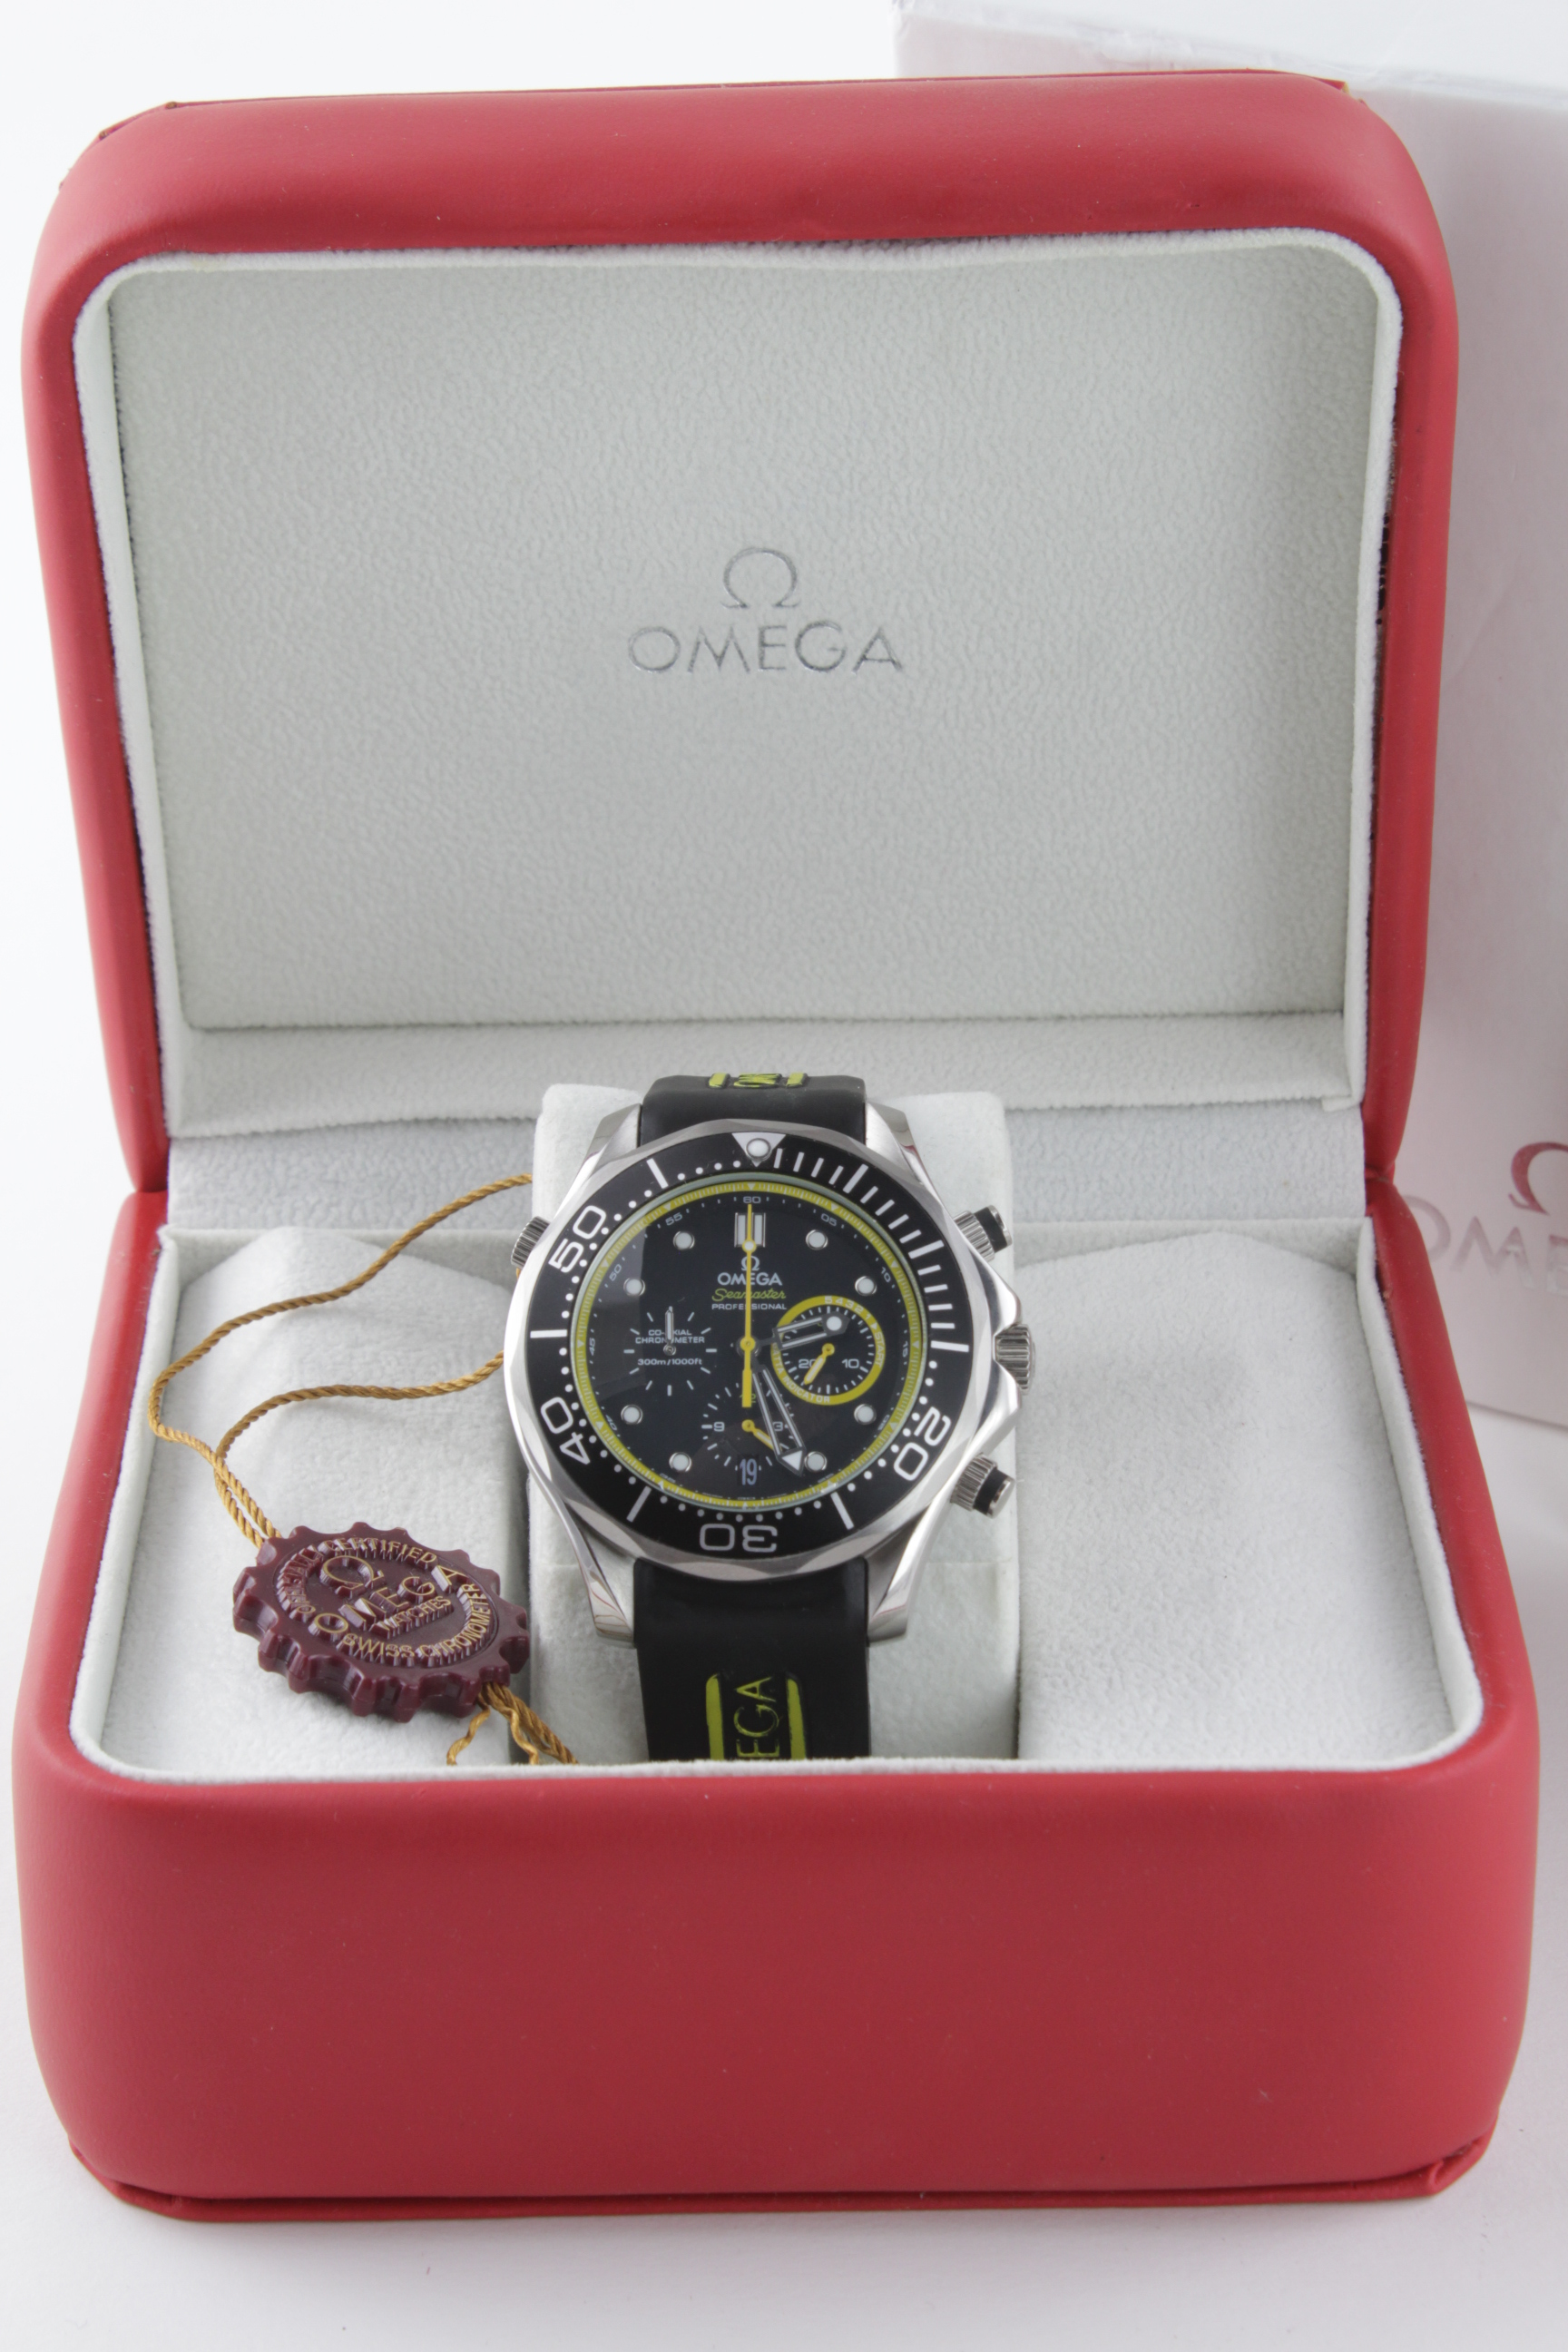 Gents Omega Seamaster Professional Chrono Limited Edition 34TH America's Cup wristwatch, as new with - Image 2 of 2